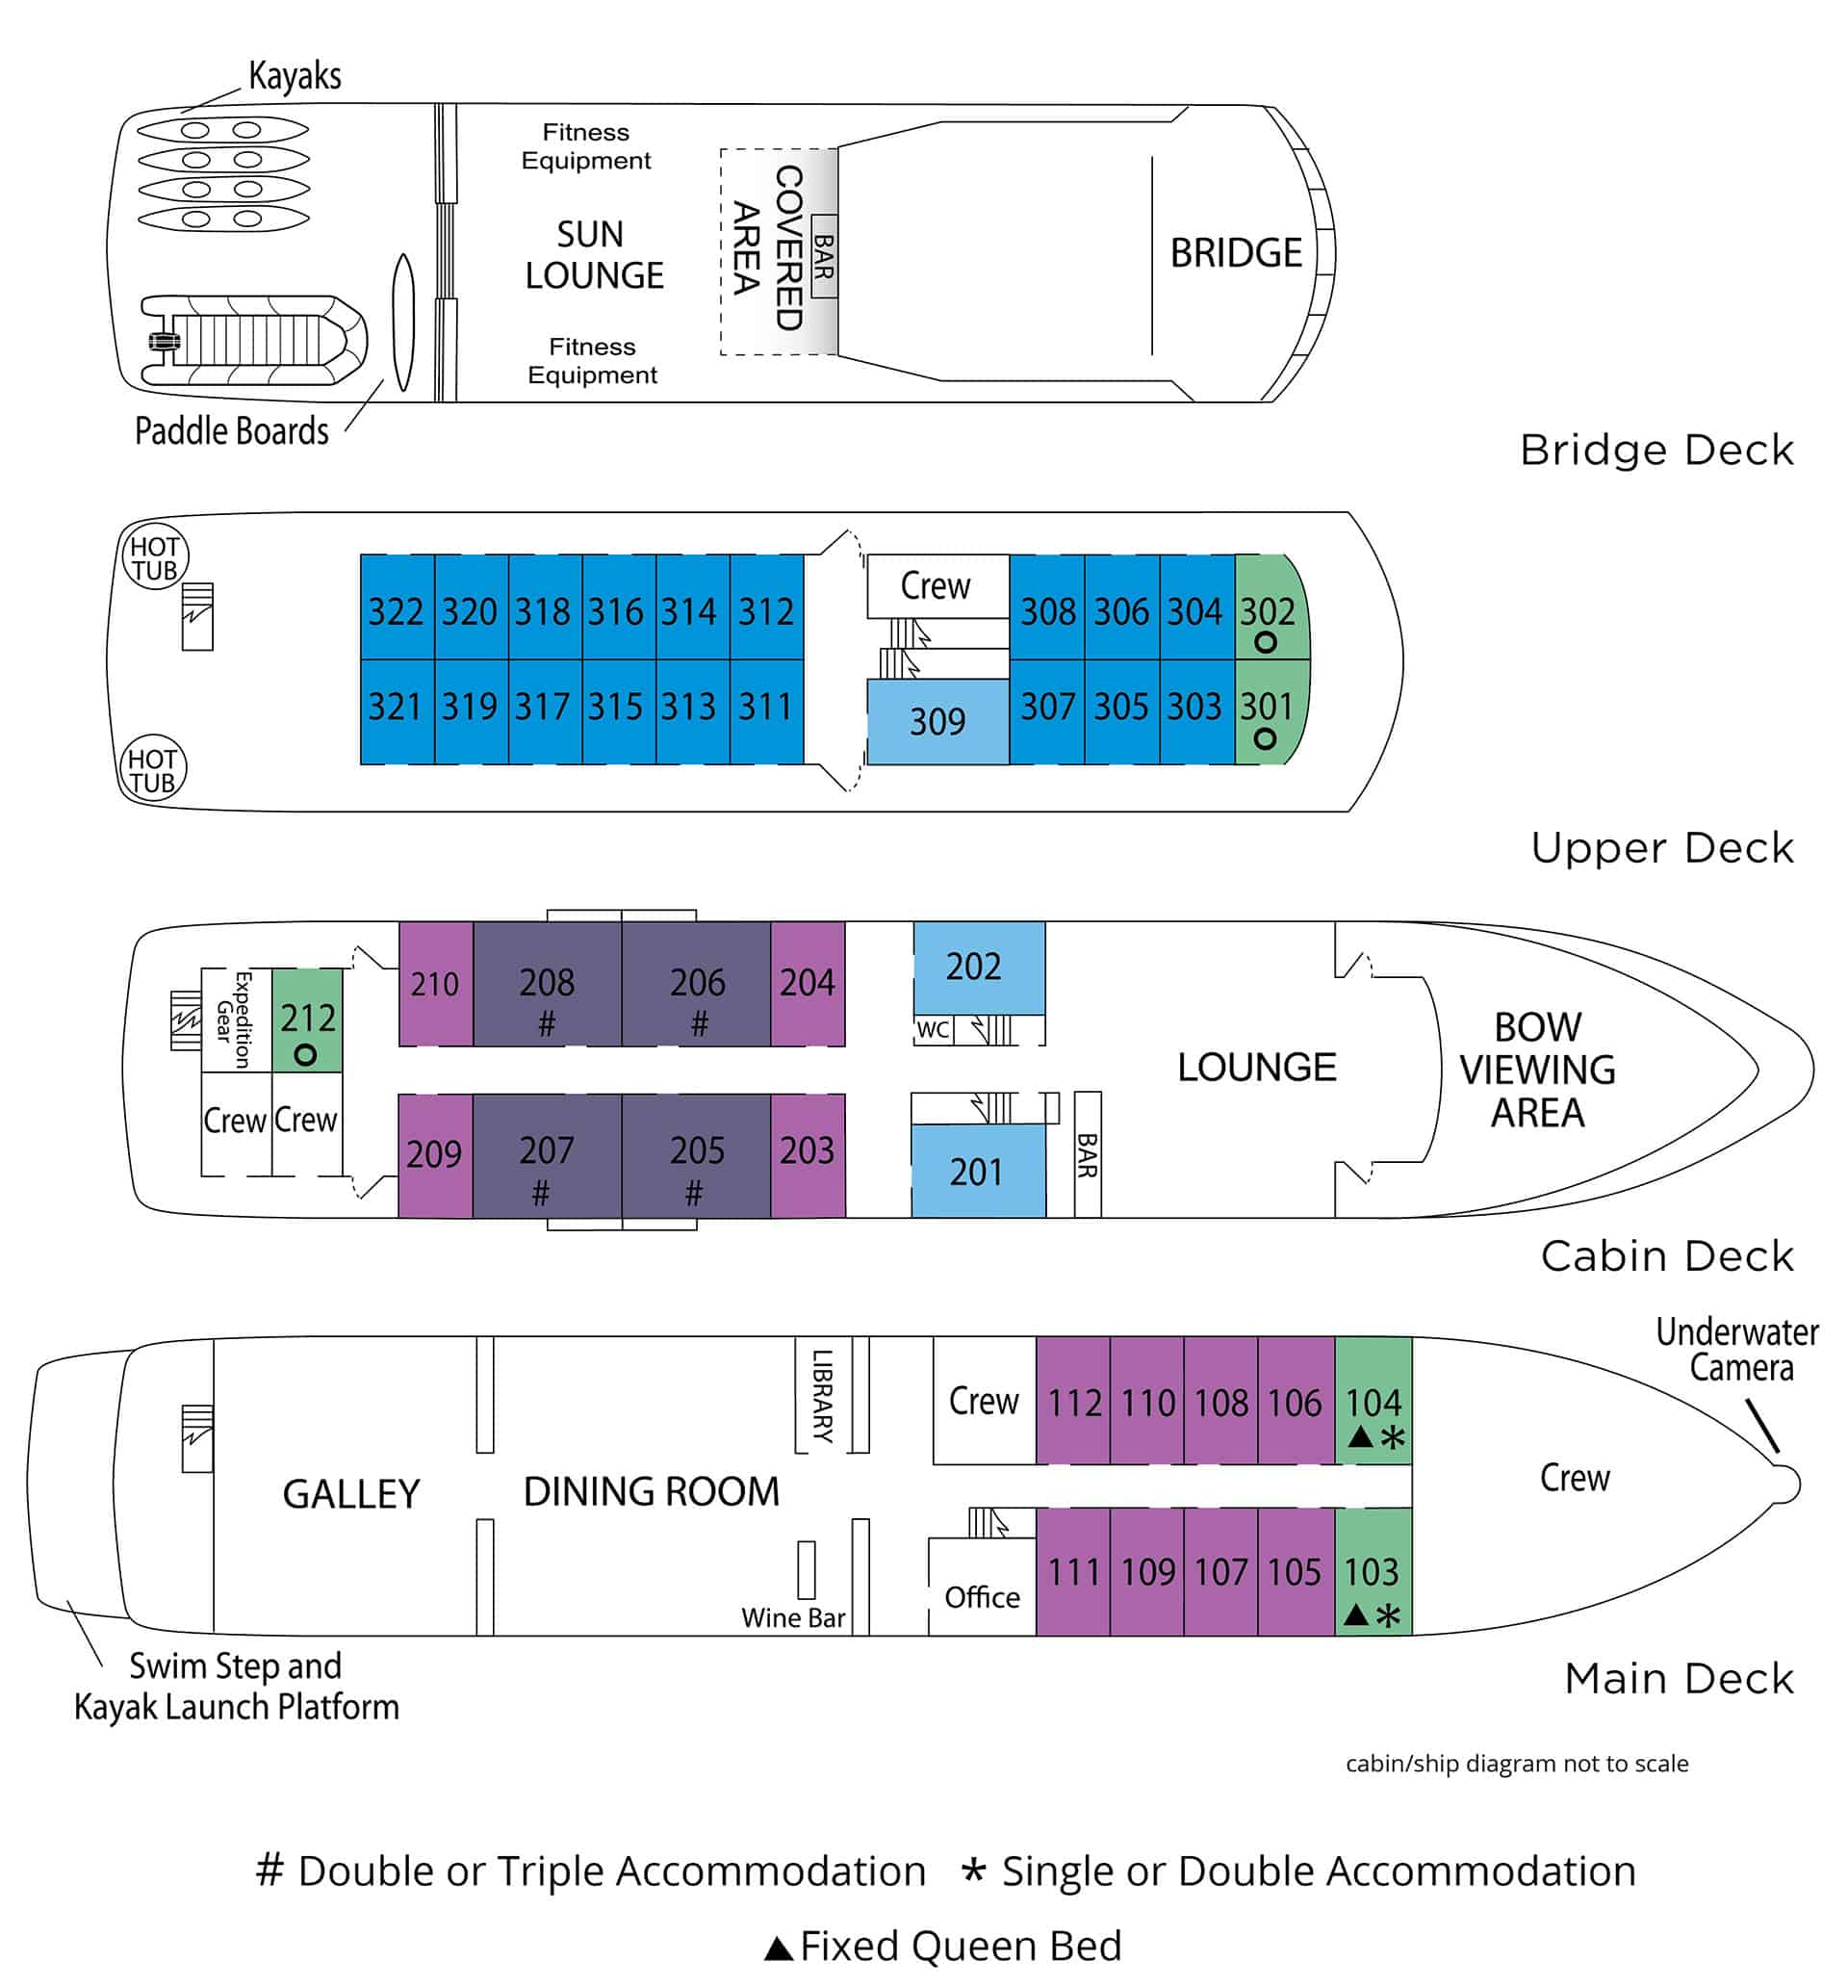 Safari endeavor small ship deck plan with four levels